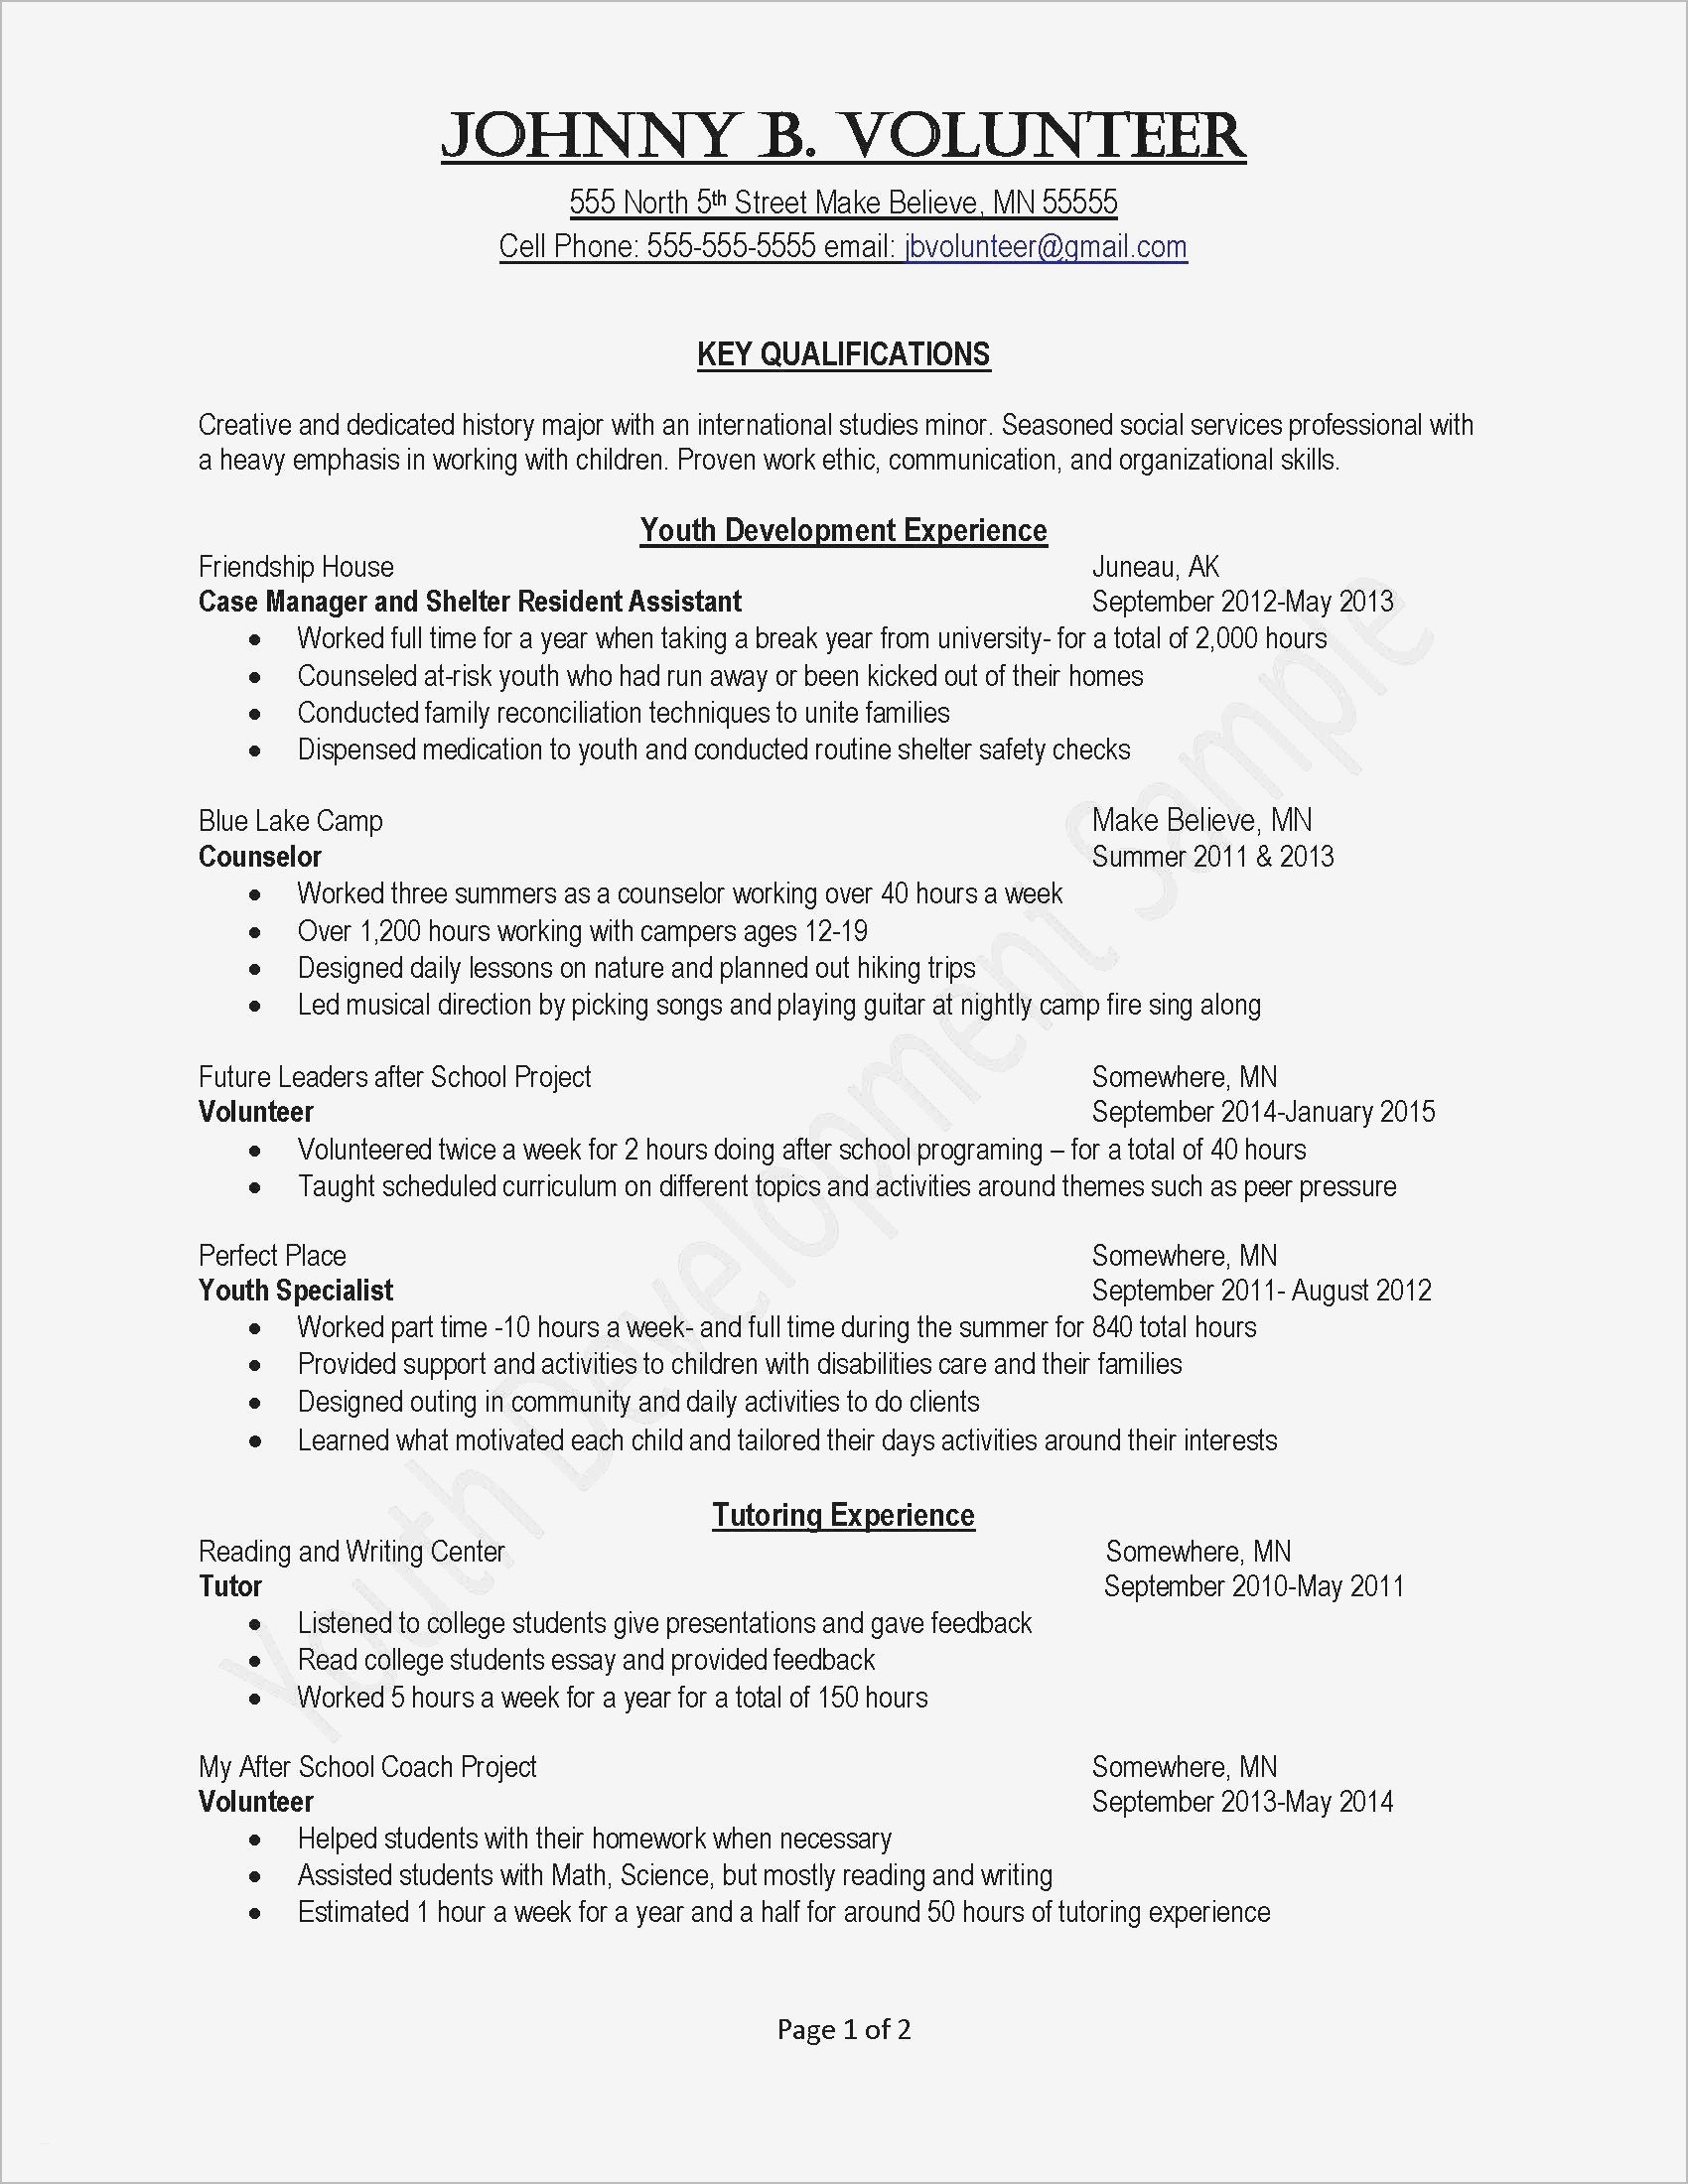 cover letter template word doc Collection-resume and cover letter template elegant activities resume template valid job fer letter template us copy od of resume and cover letter template 4-j